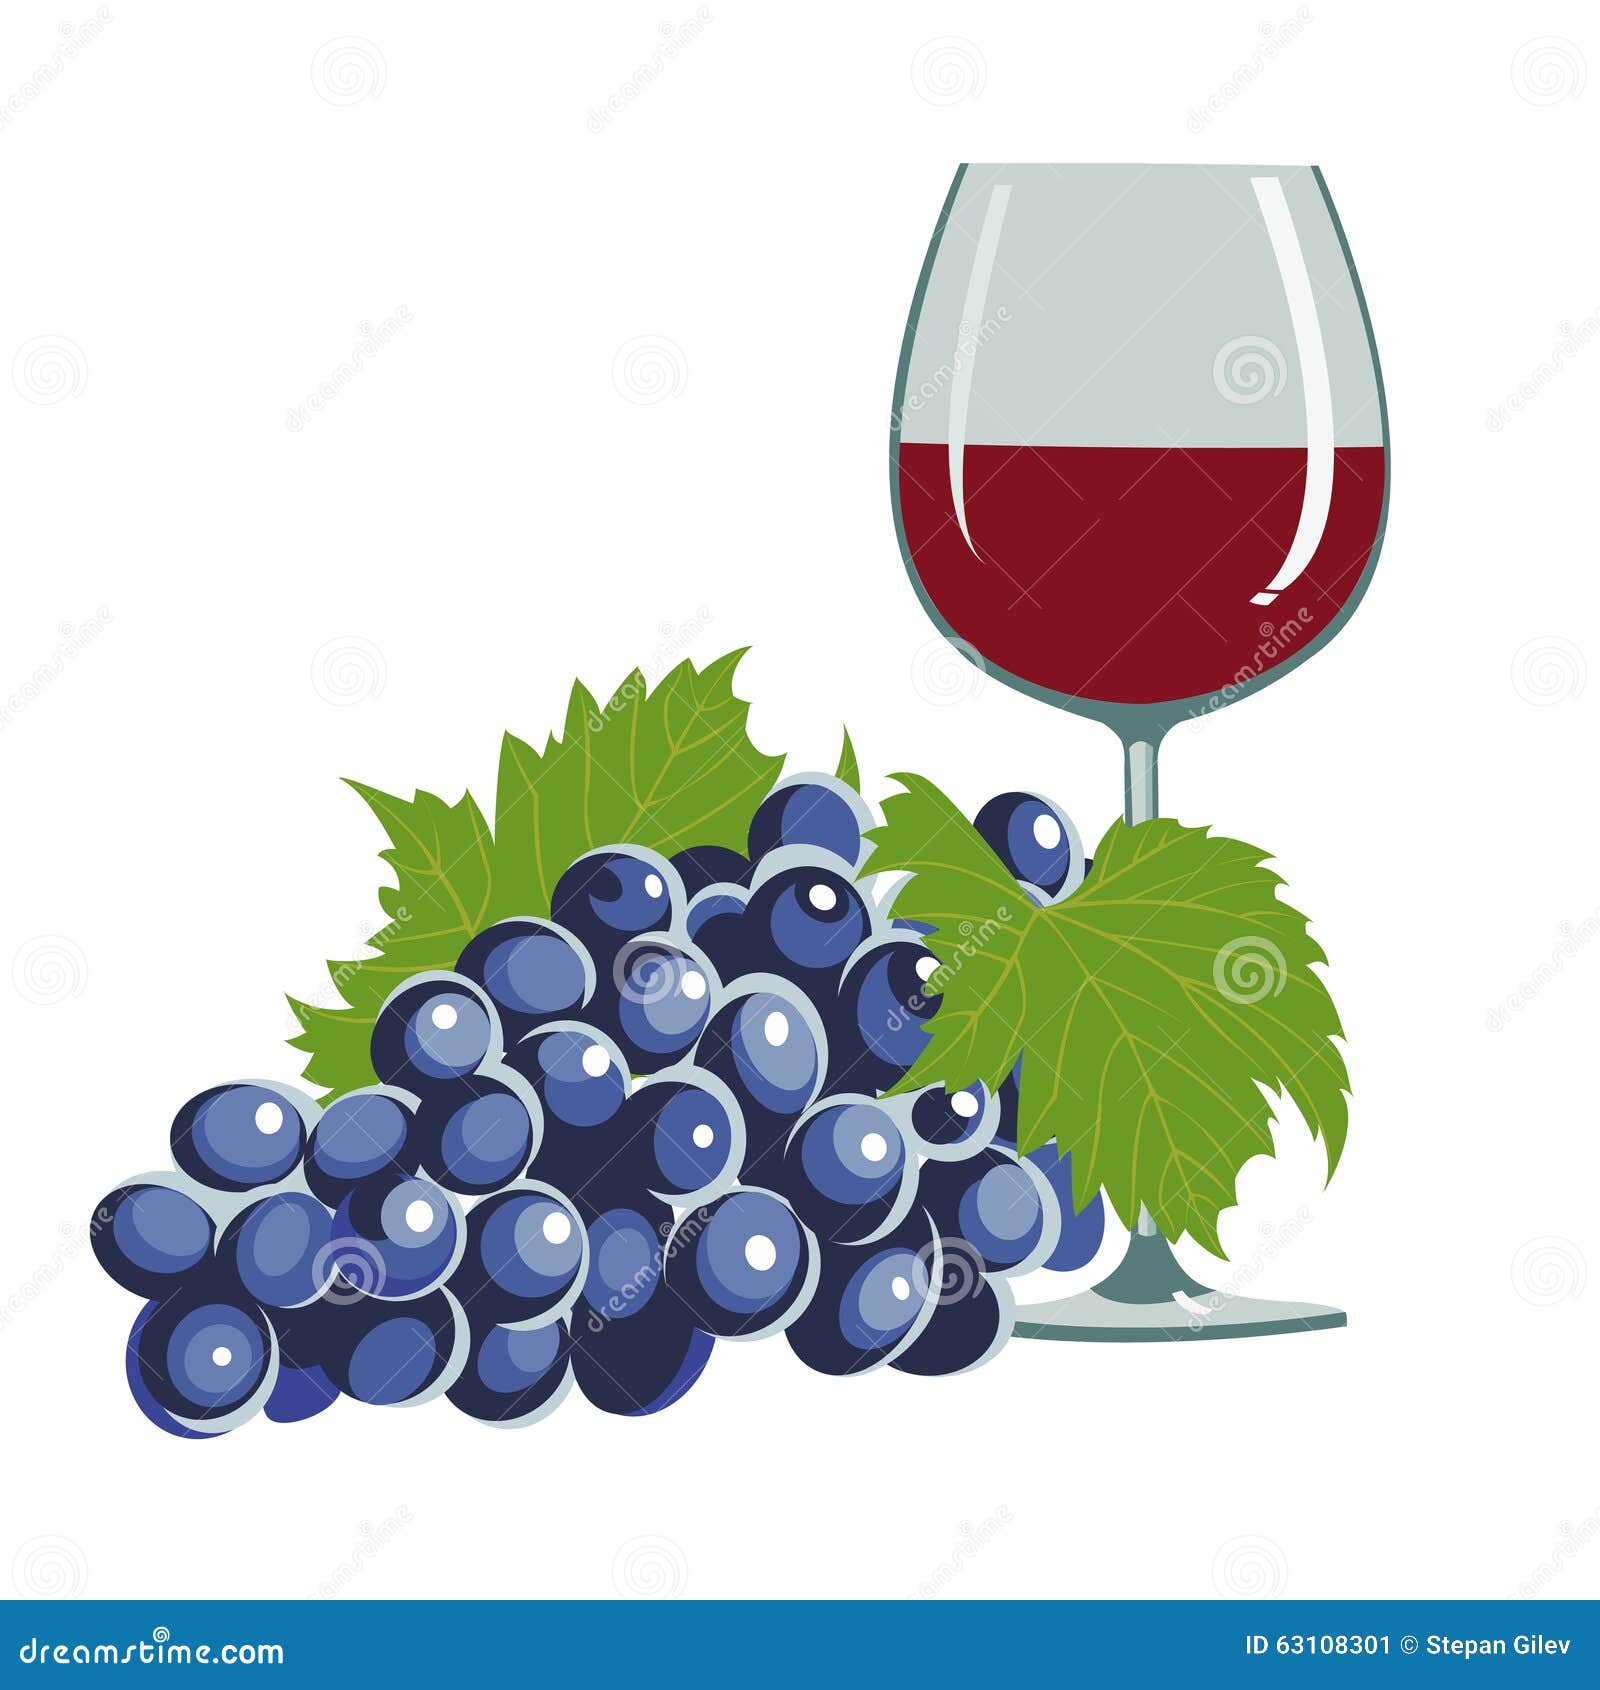 Grapes and a wine glass stock vector. Illustration of berries - 63108301